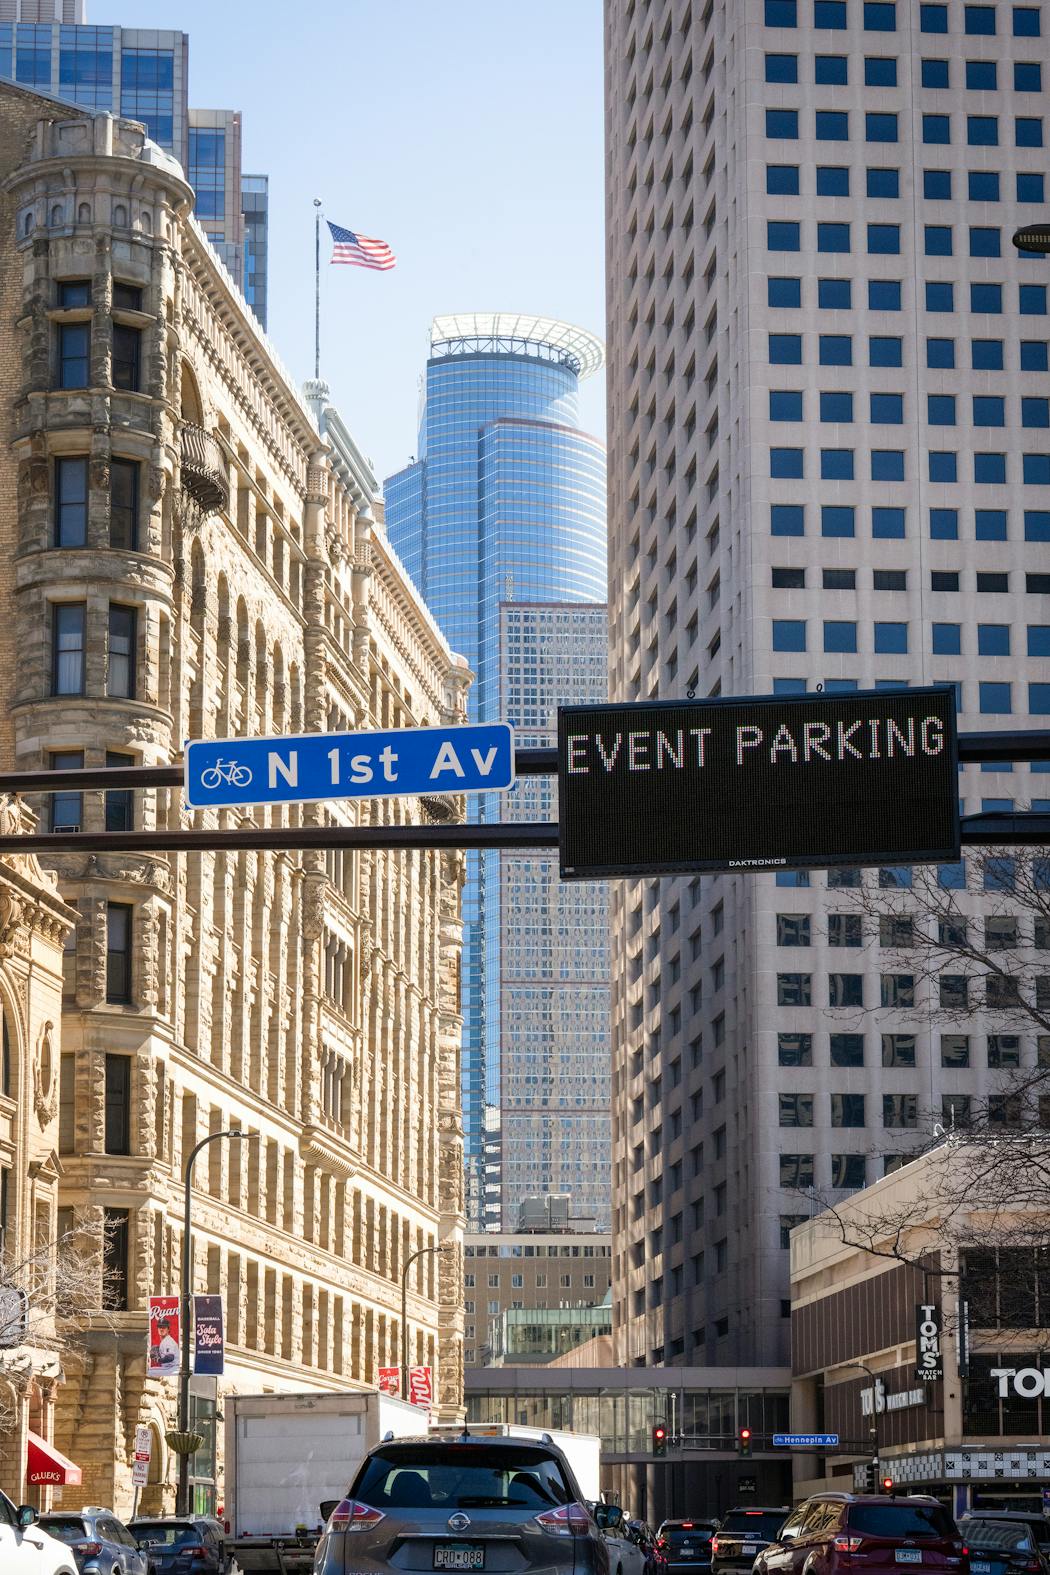 The intersection of 1st Avenue N. and N. 6th Street in downtown Minneapolis.